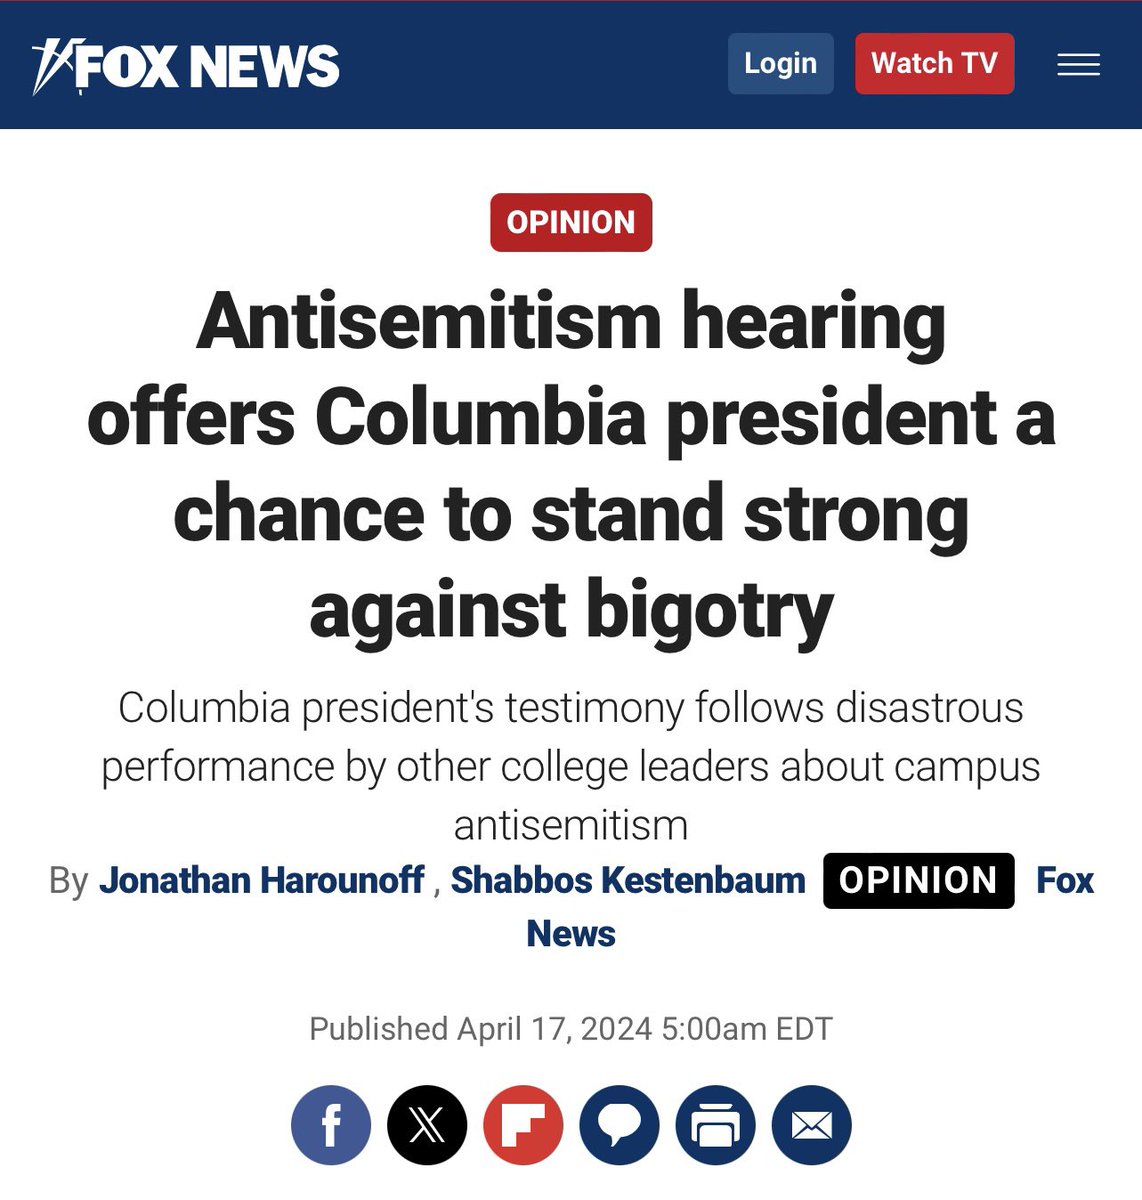 Today, Columbia University’s President, Minouche Shafik, will speak before the House Committee on Education & the Workforce about Columbia’s efforts to combat antisemitism. We hope she has better answers than Presidents Gay and Magill did during last December’s disaster hearing,